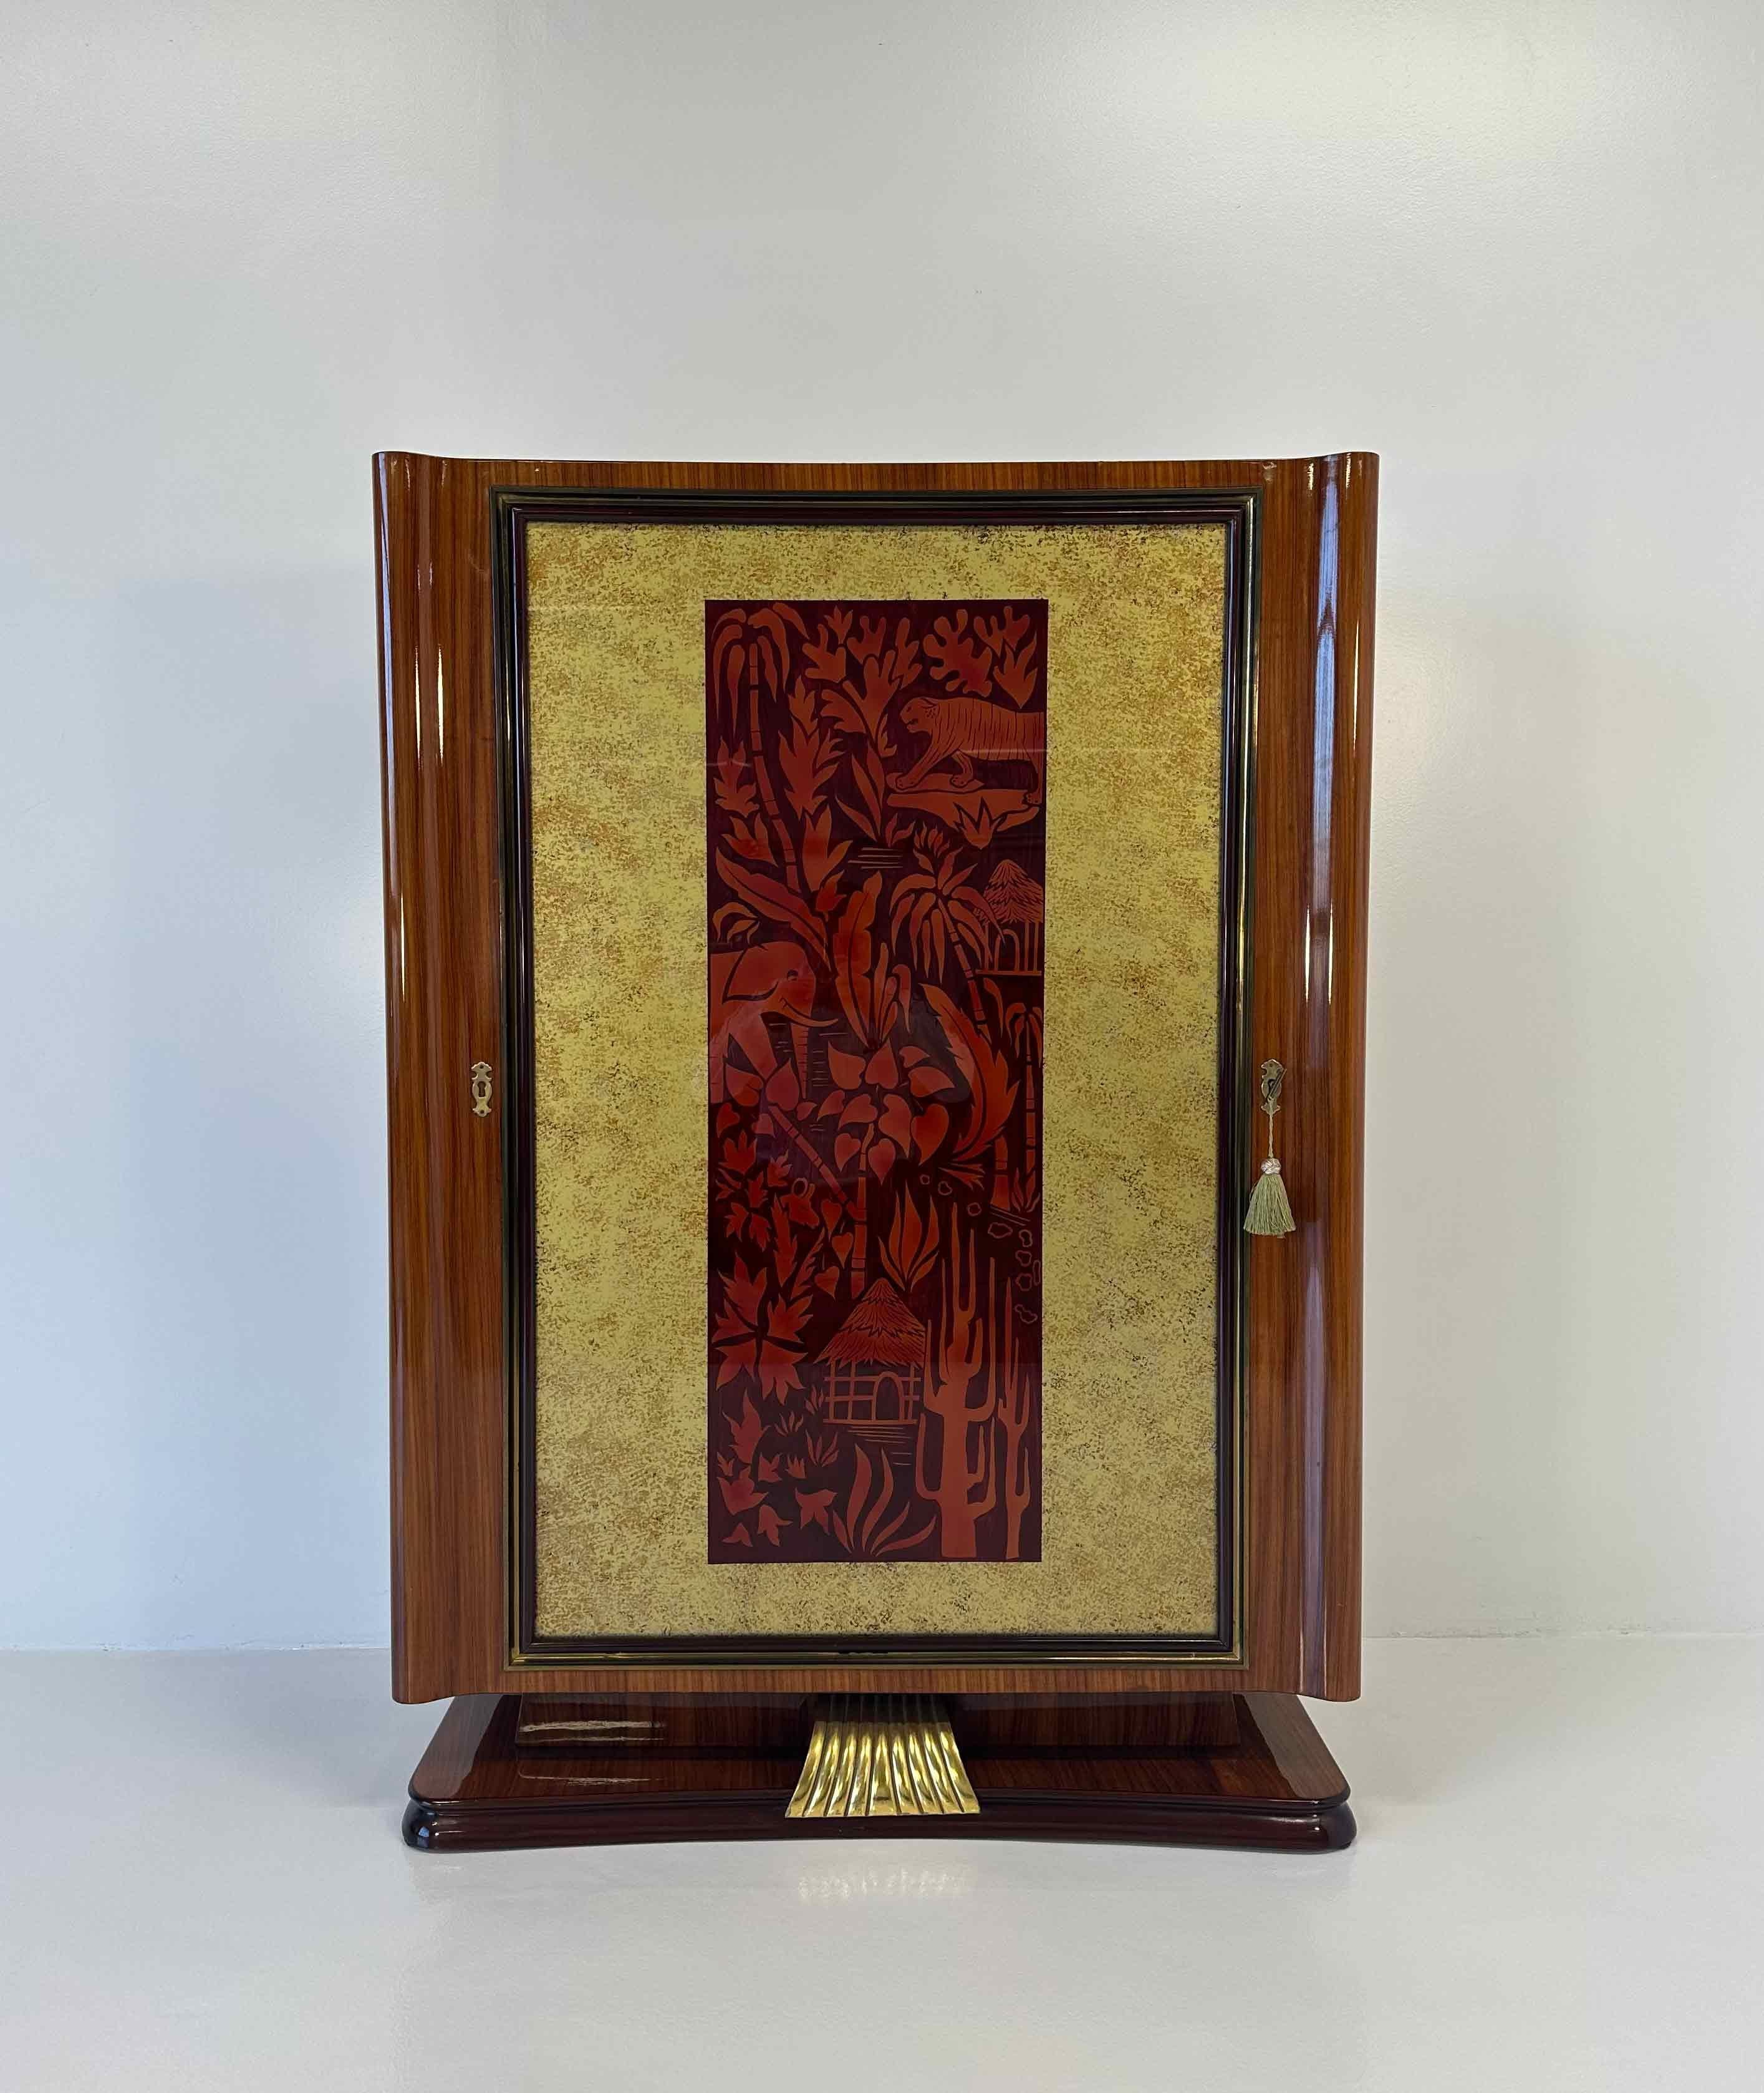 This Art Deco Style Dry Bar Cabinet is a real piece of art that belongs to a museum and was produced in Italy in the 1950s by the Vittorio Dassi company. 
The structure is made of a fine exotic wood, enriched by a gold leafed wood decoration on the